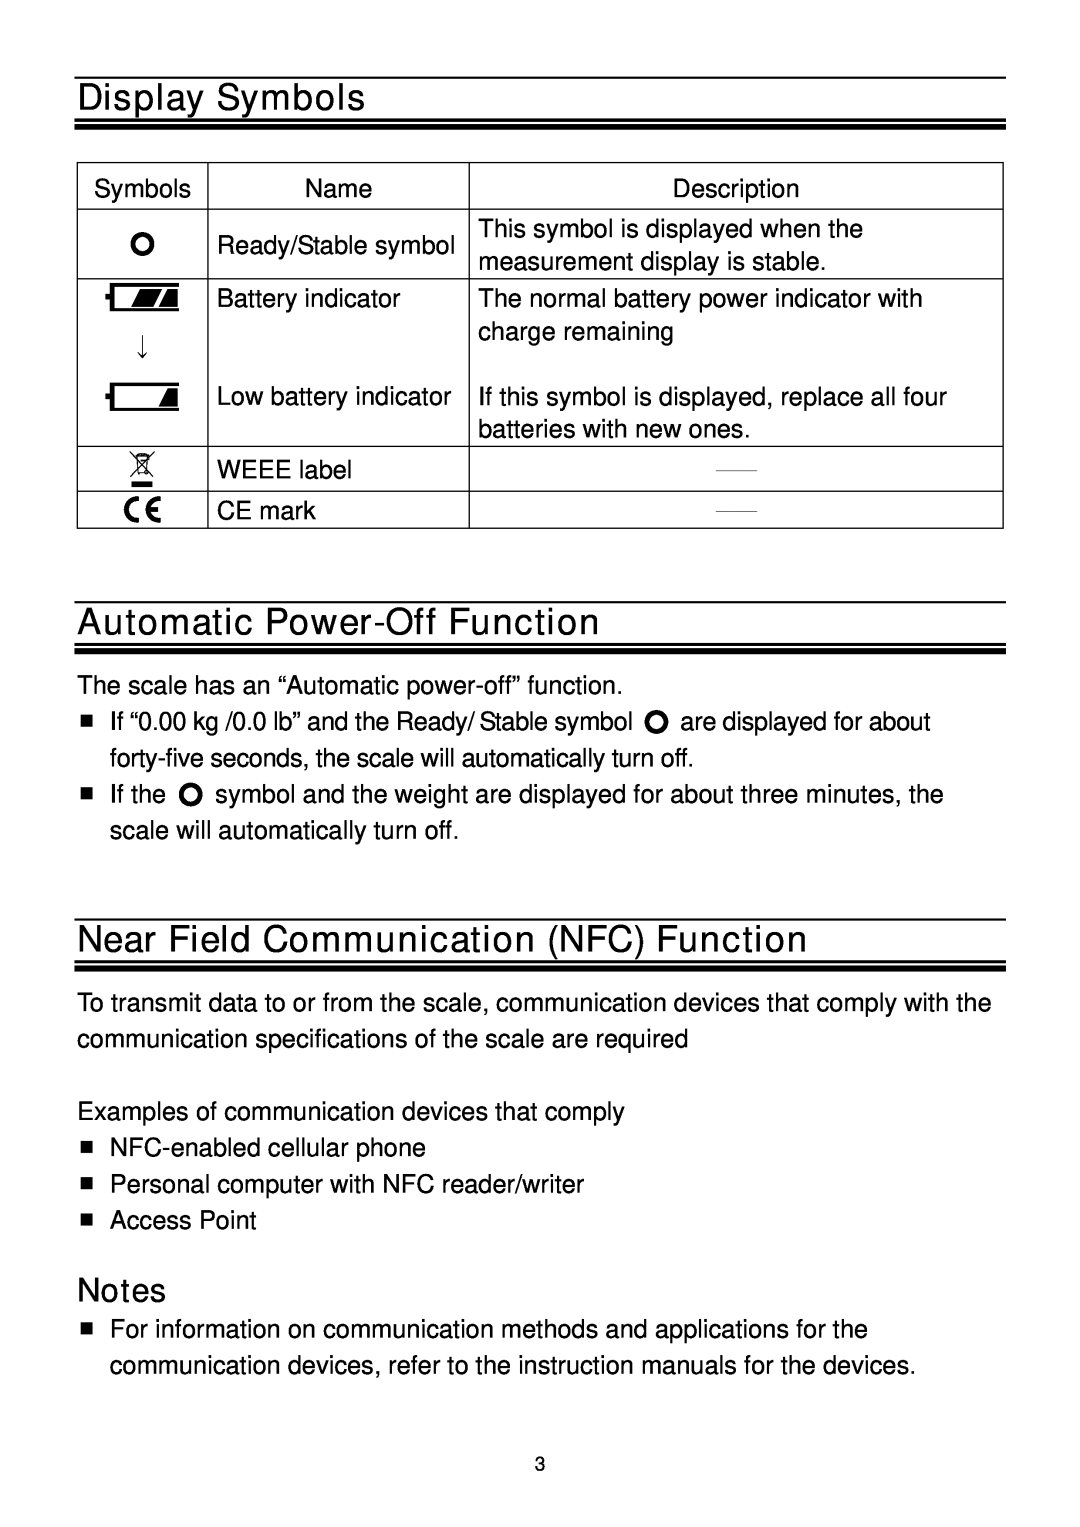 A&D UC-324NFC instruction manual Display Symbols, Automatic Power-Off Function, Near Field Communication NFC Function 